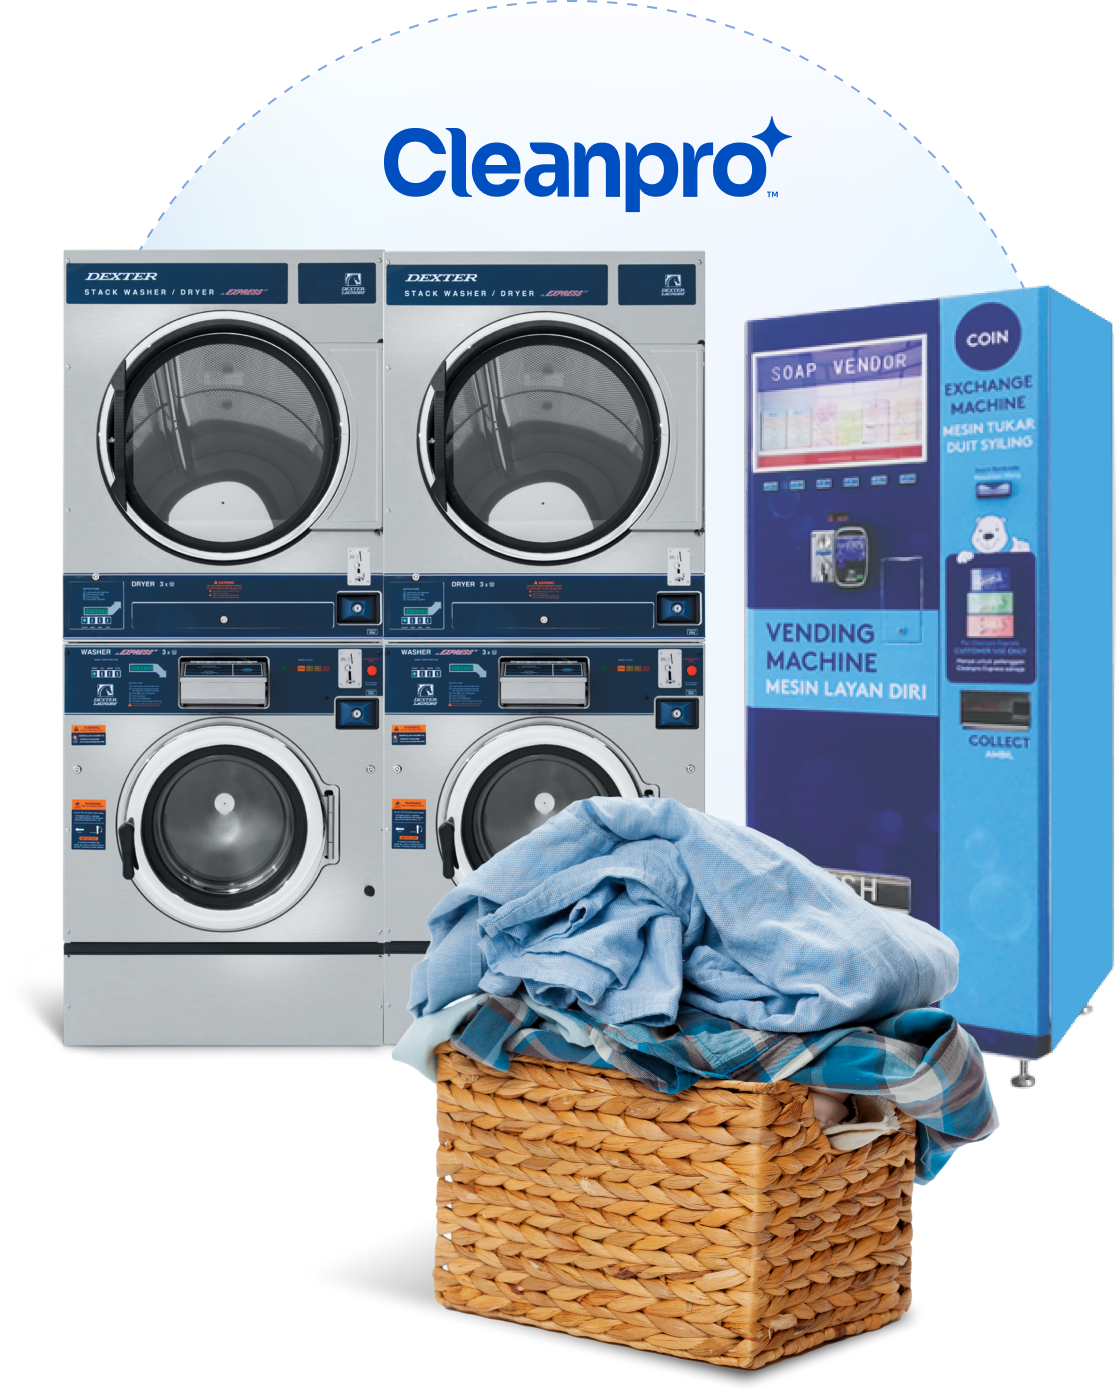 Cleanpro package provides franchisee with branded washing machines and other equipments.